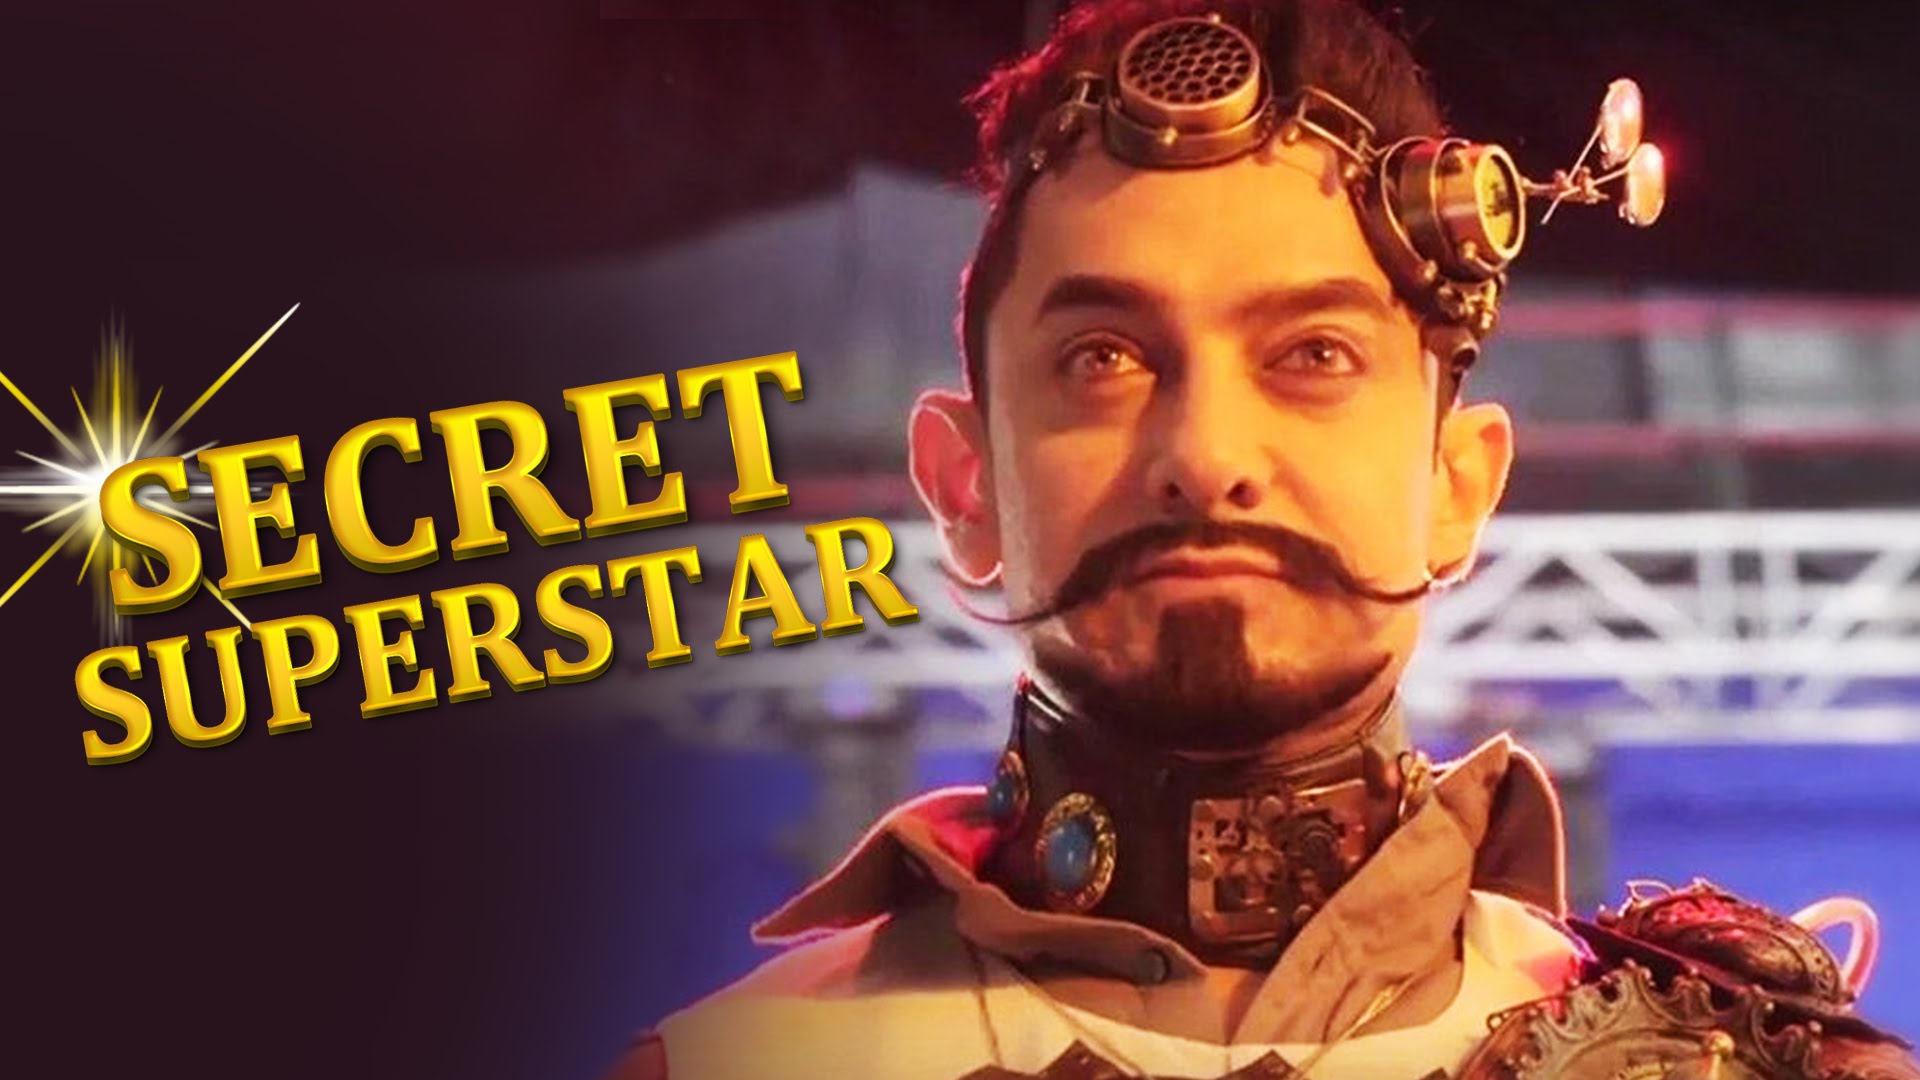 Secret Superstar Movie Review: Story about Dreams, Love, Friendship and much more 1